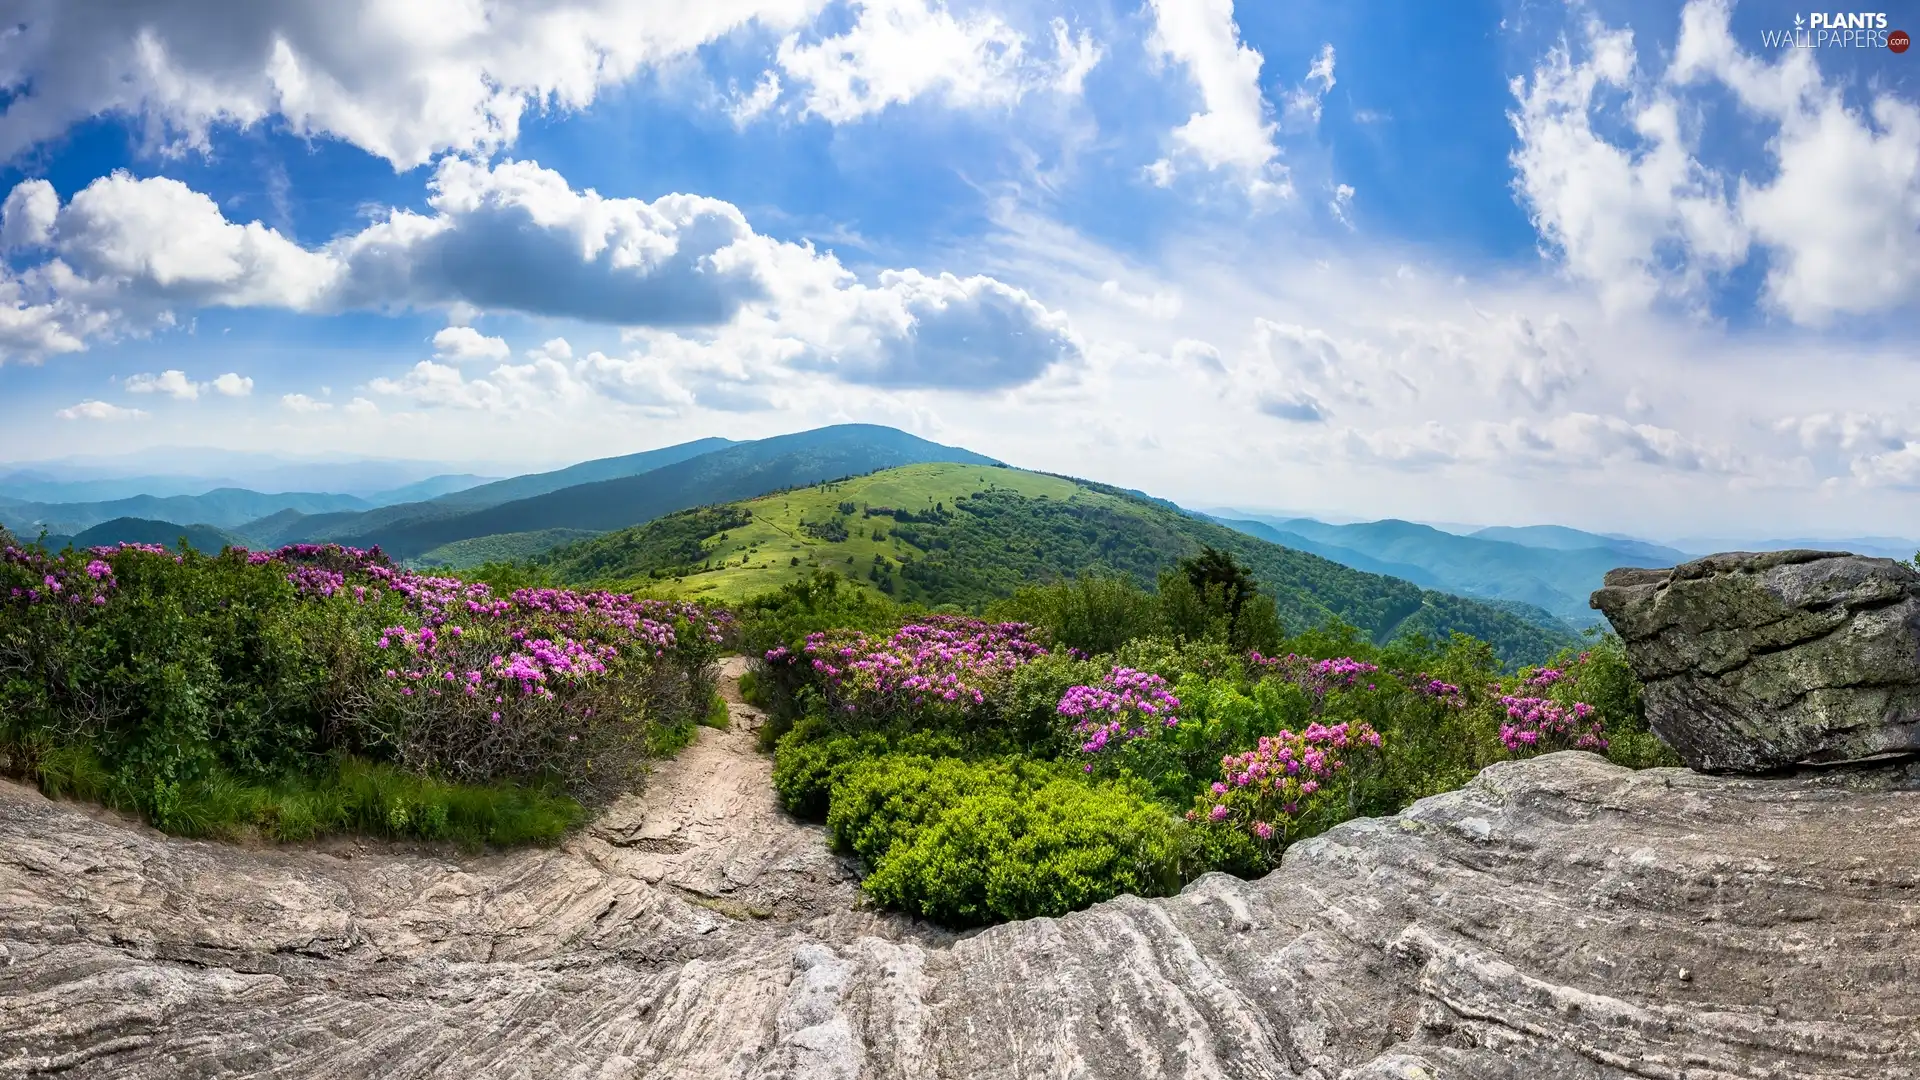 Tennessee State, Roan Mountain, rocks, Appalachian Mountains, Appalachian National Scenic Trail, The United States, Rhododendron